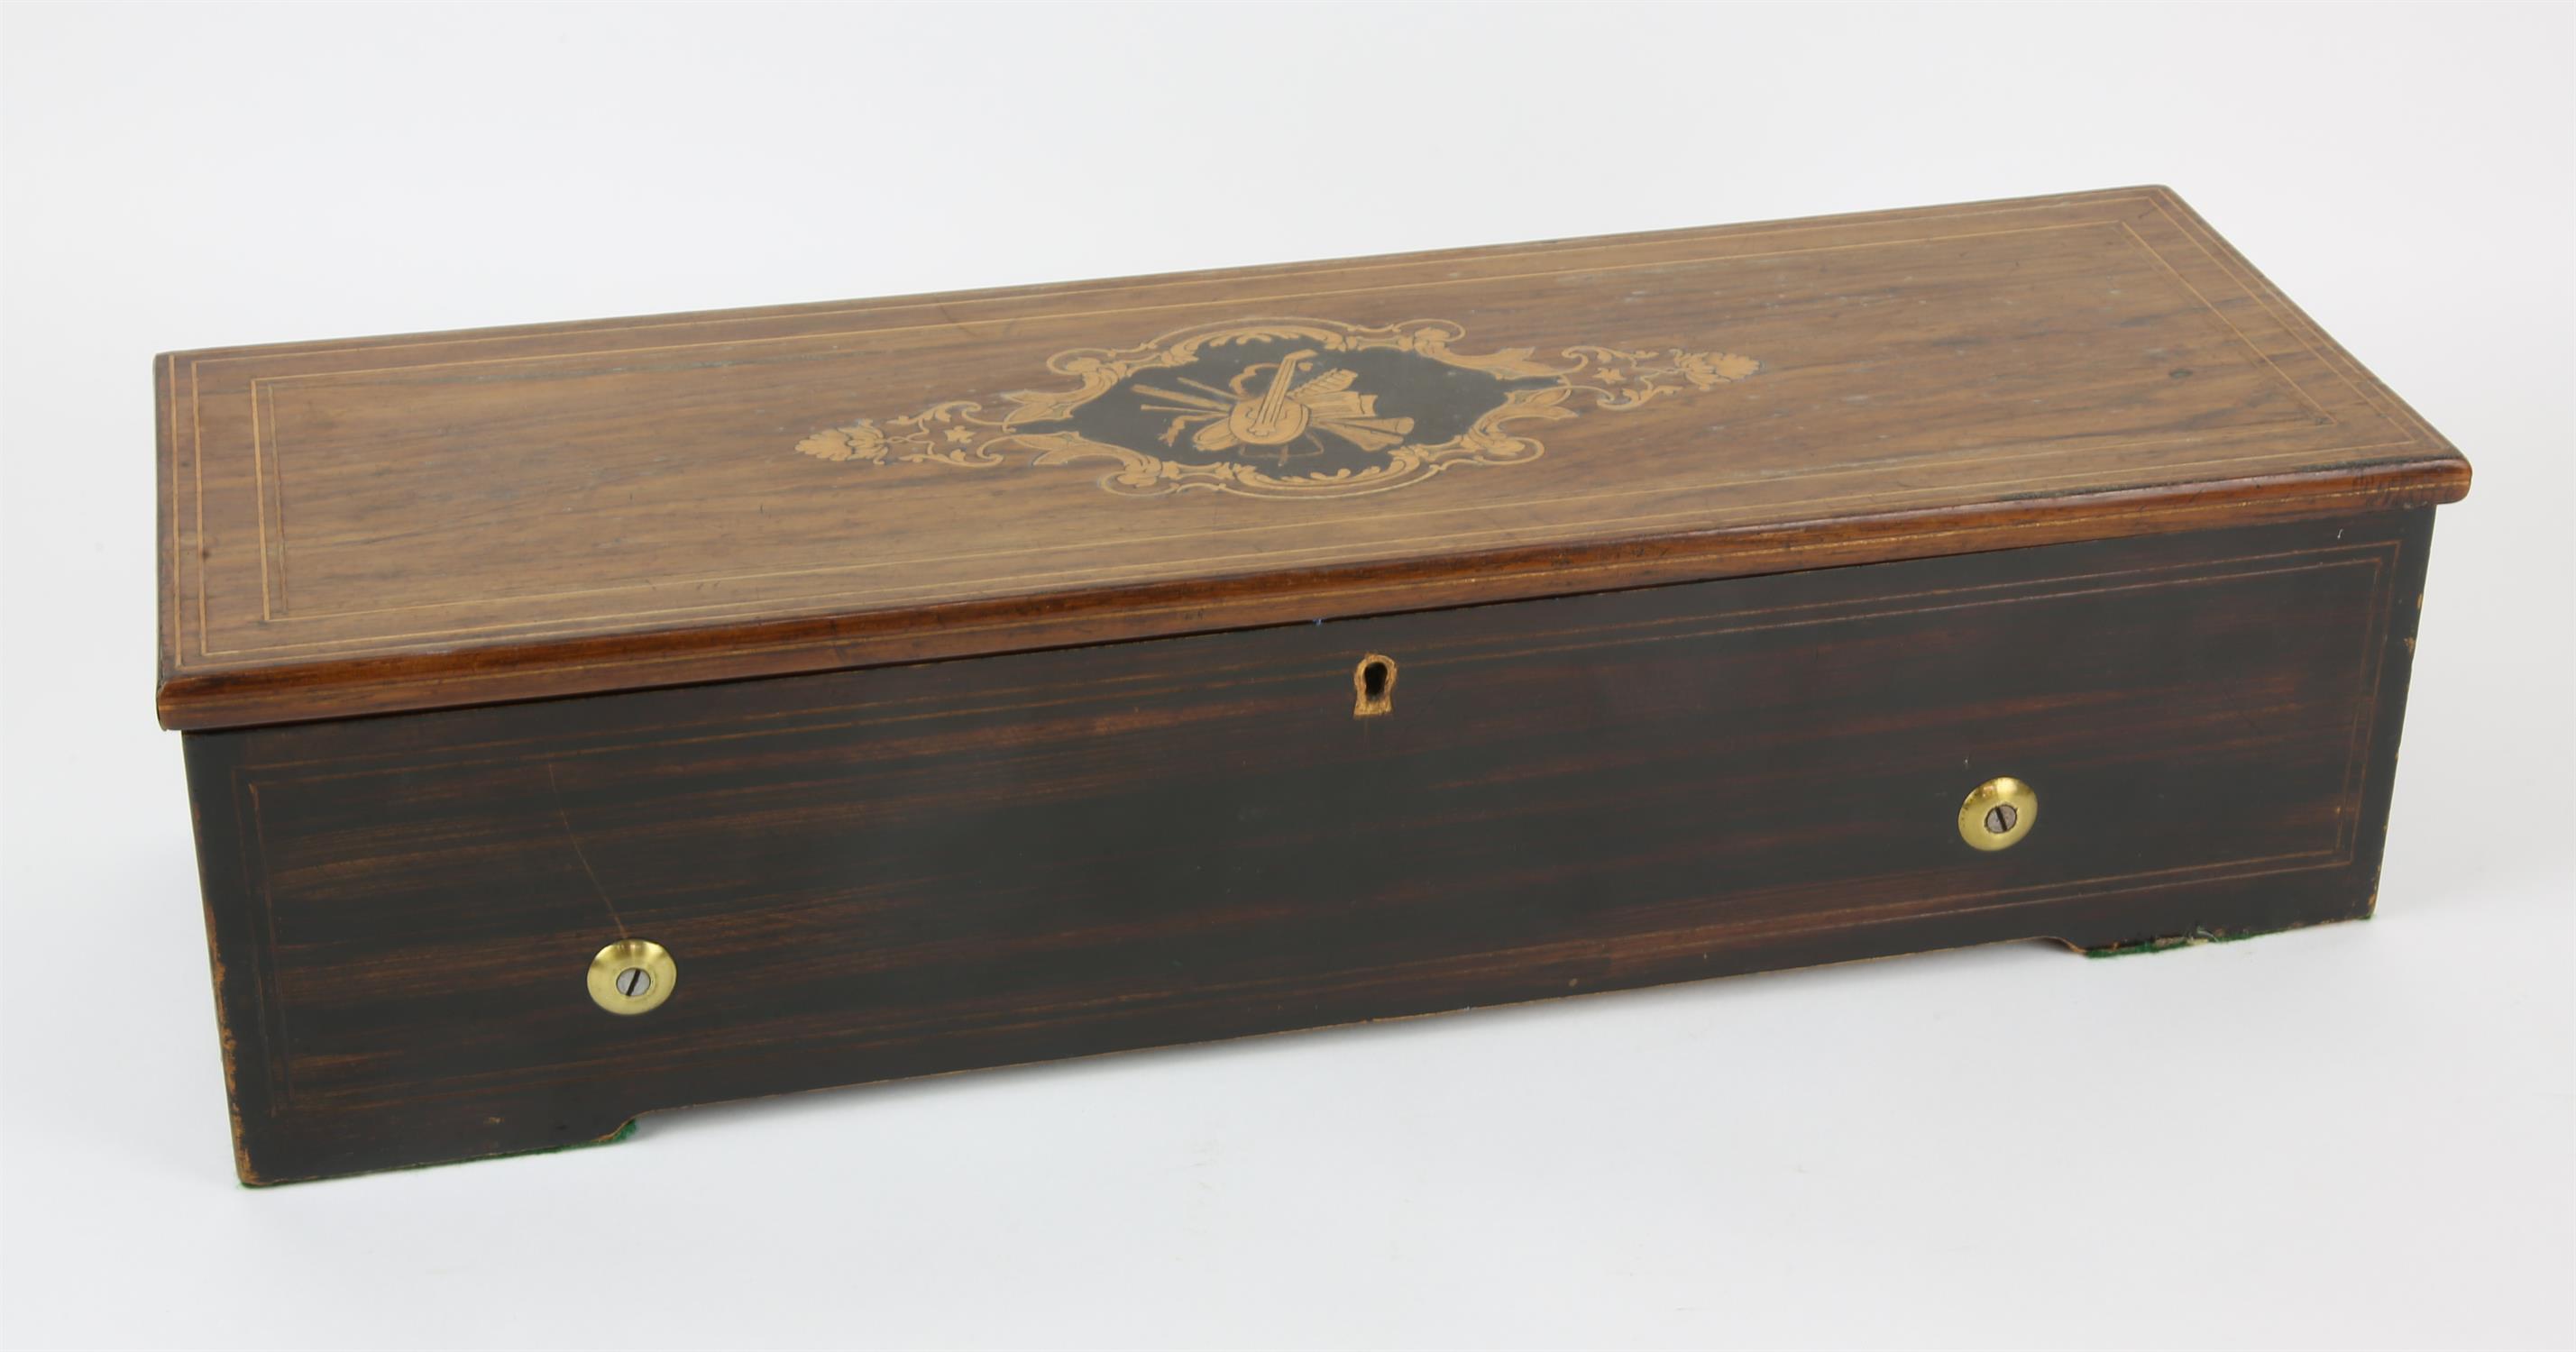 19th century Swiss rosewood and marquetry inlaid cylinder music box, label to underside of cover - Image 3 of 3